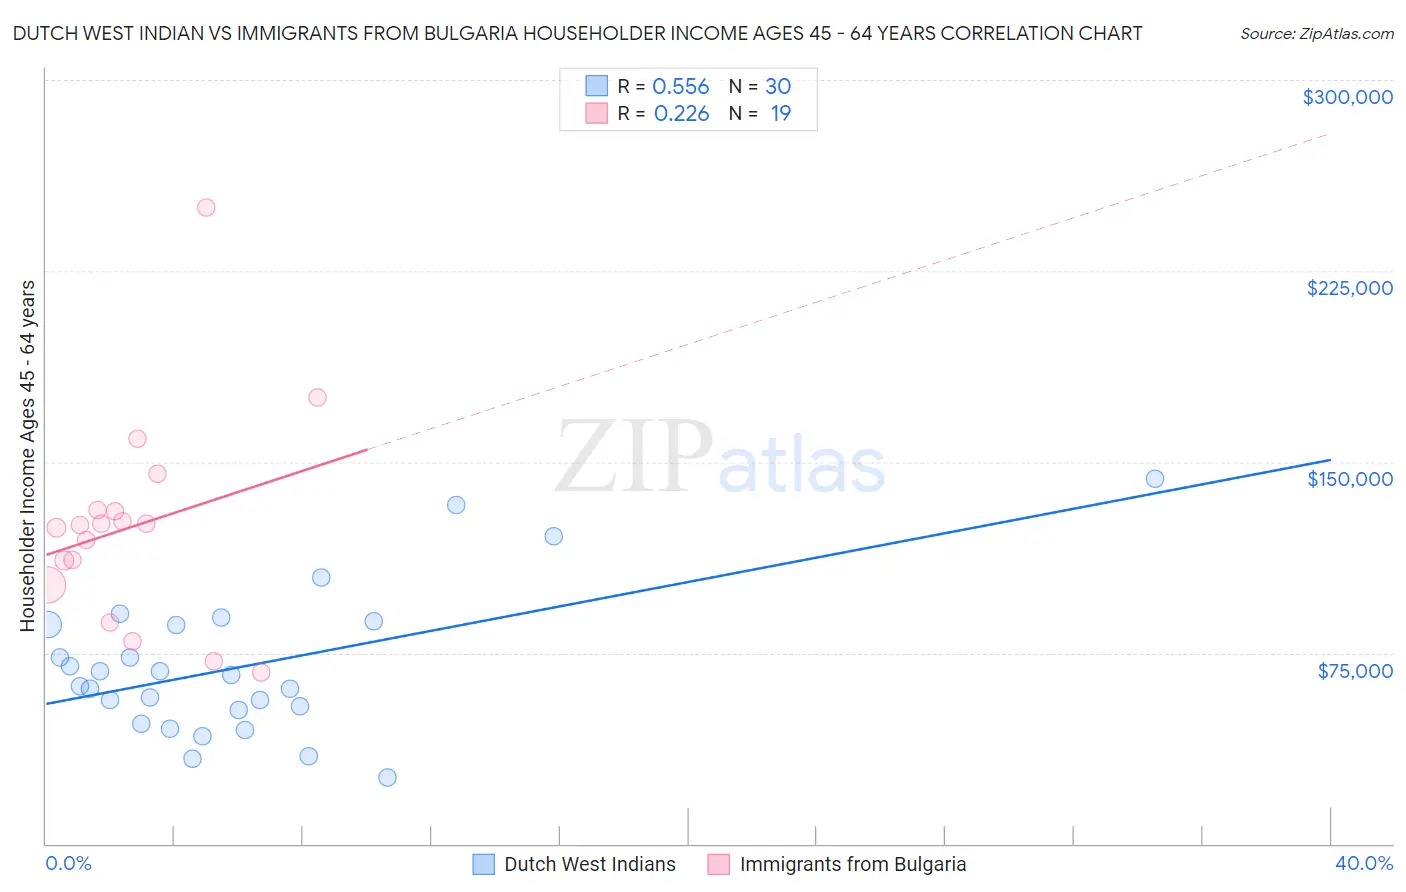 Dutch West Indian vs Immigrants from Bulgaria Householder Income Ages 45 - 64 years